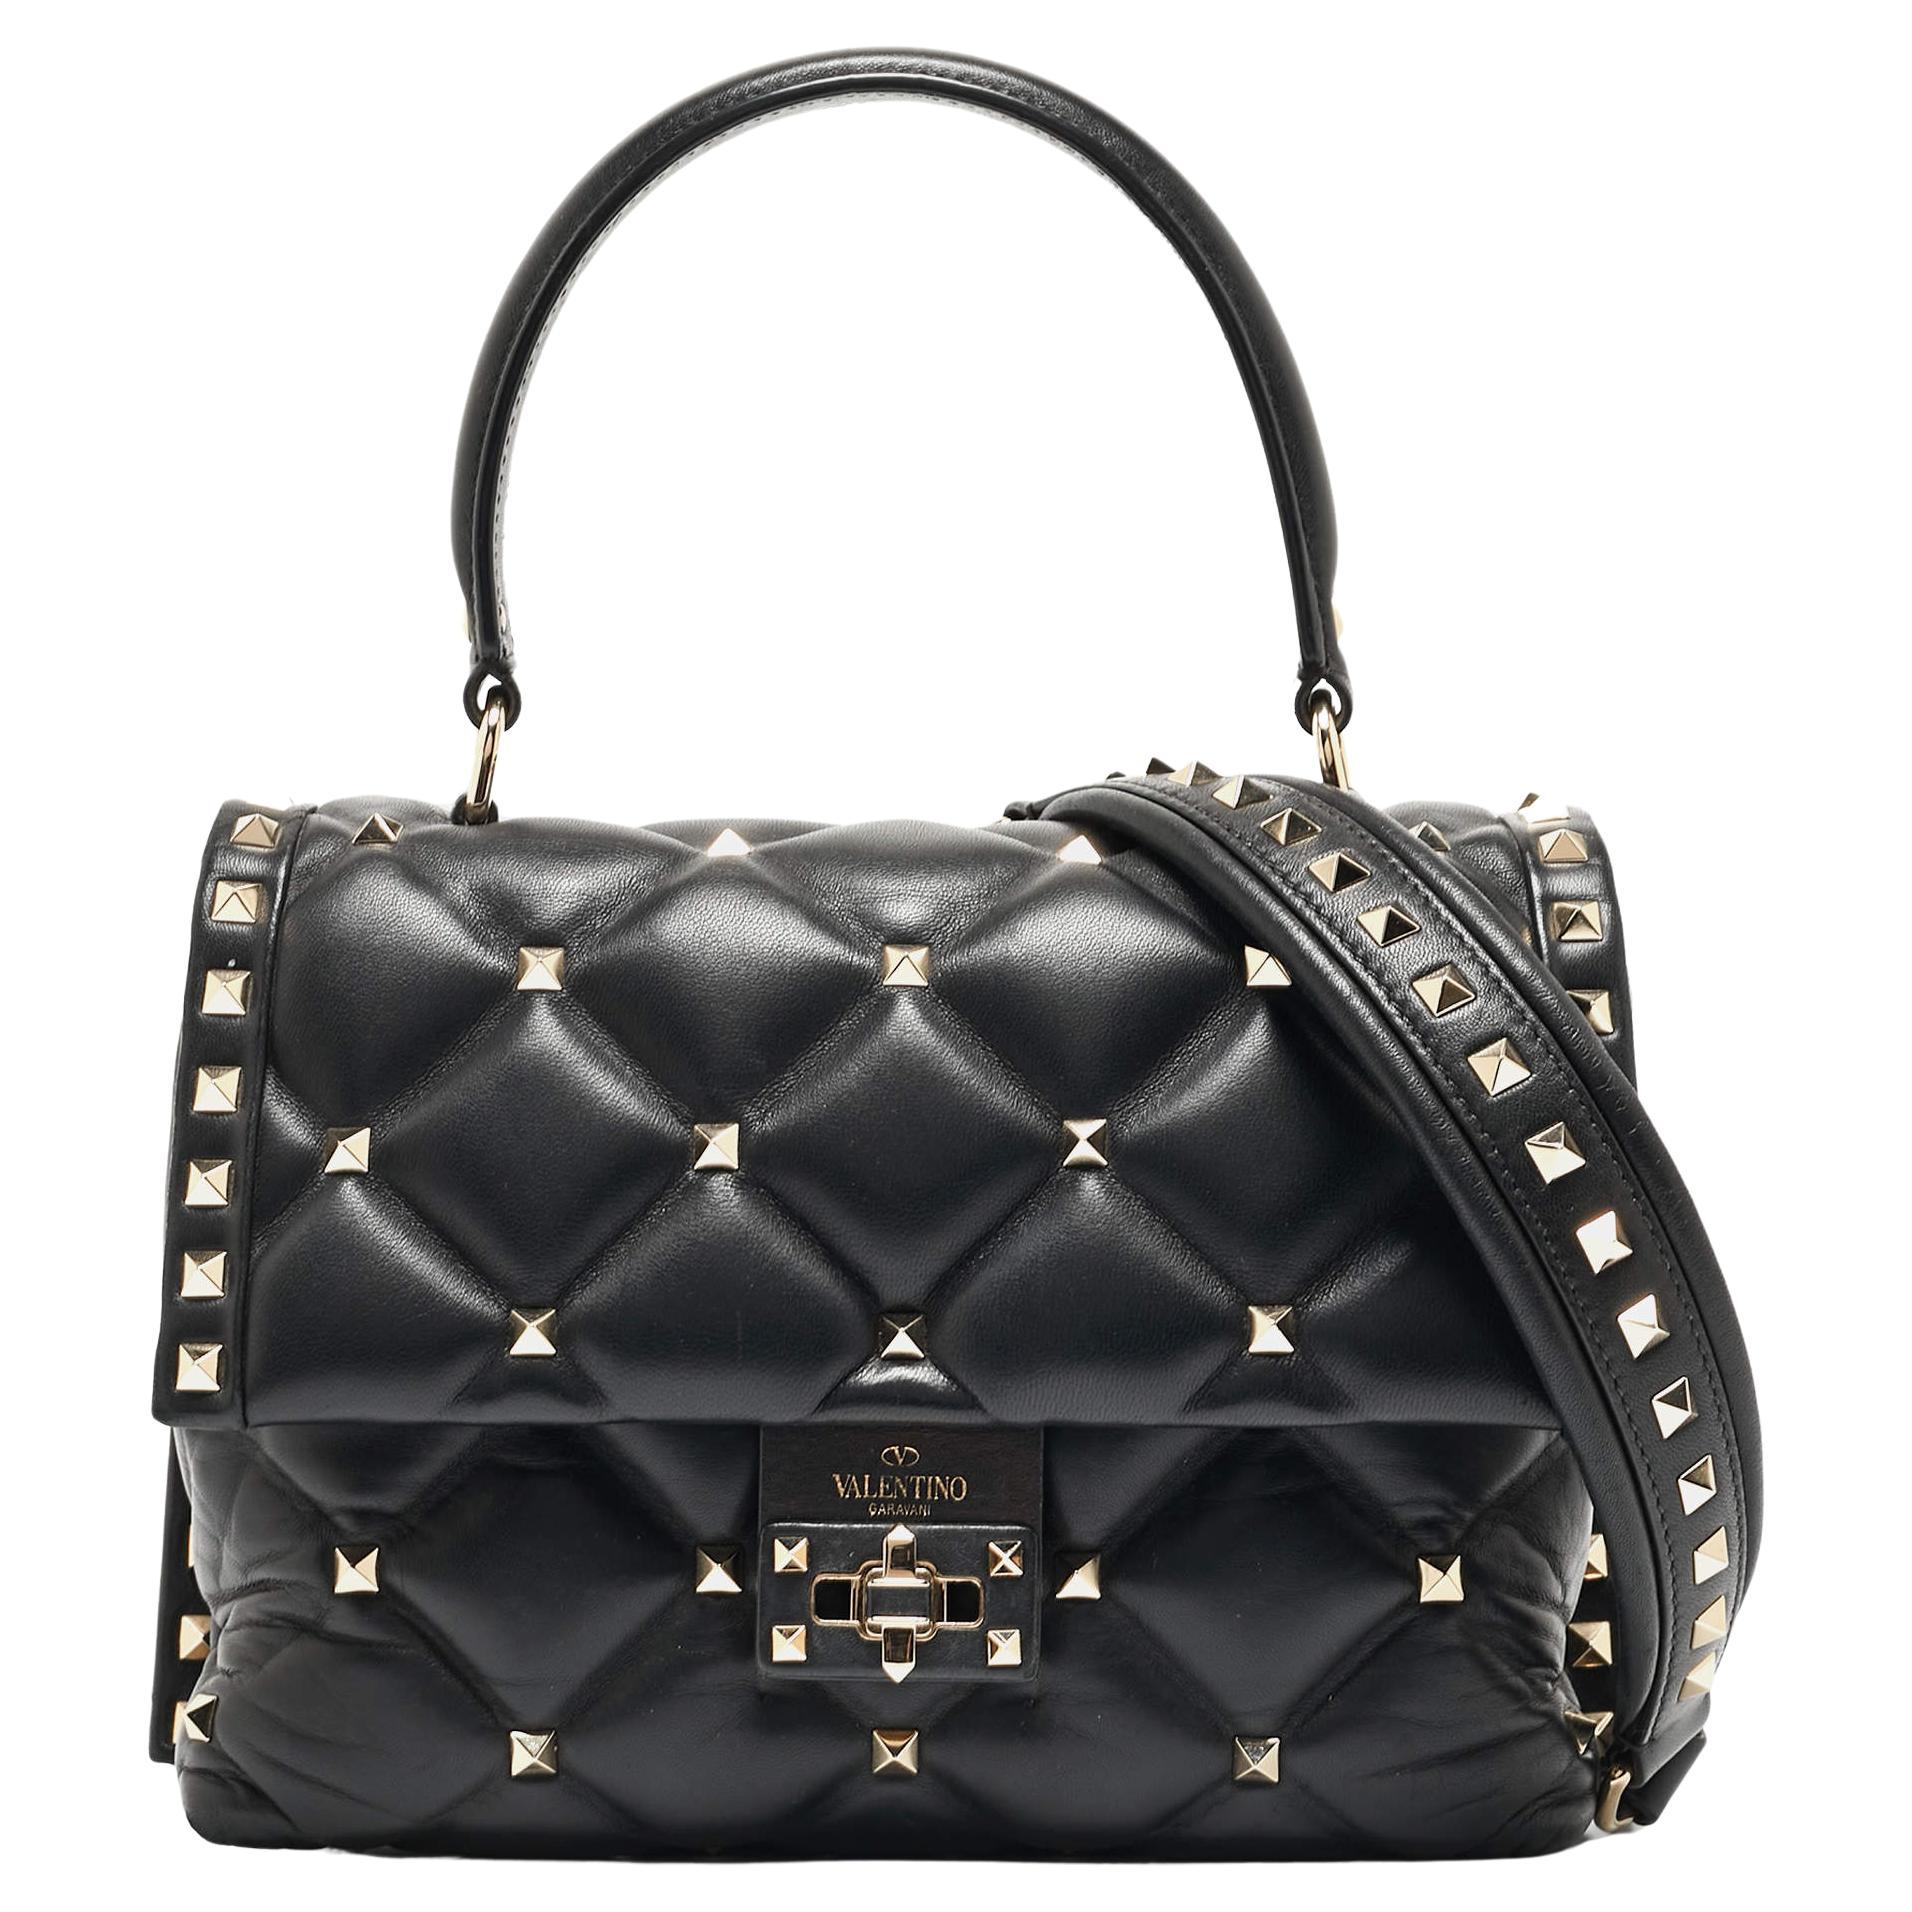 Valentino Black Quilted Leather Medium Candystud Top Handle Bag